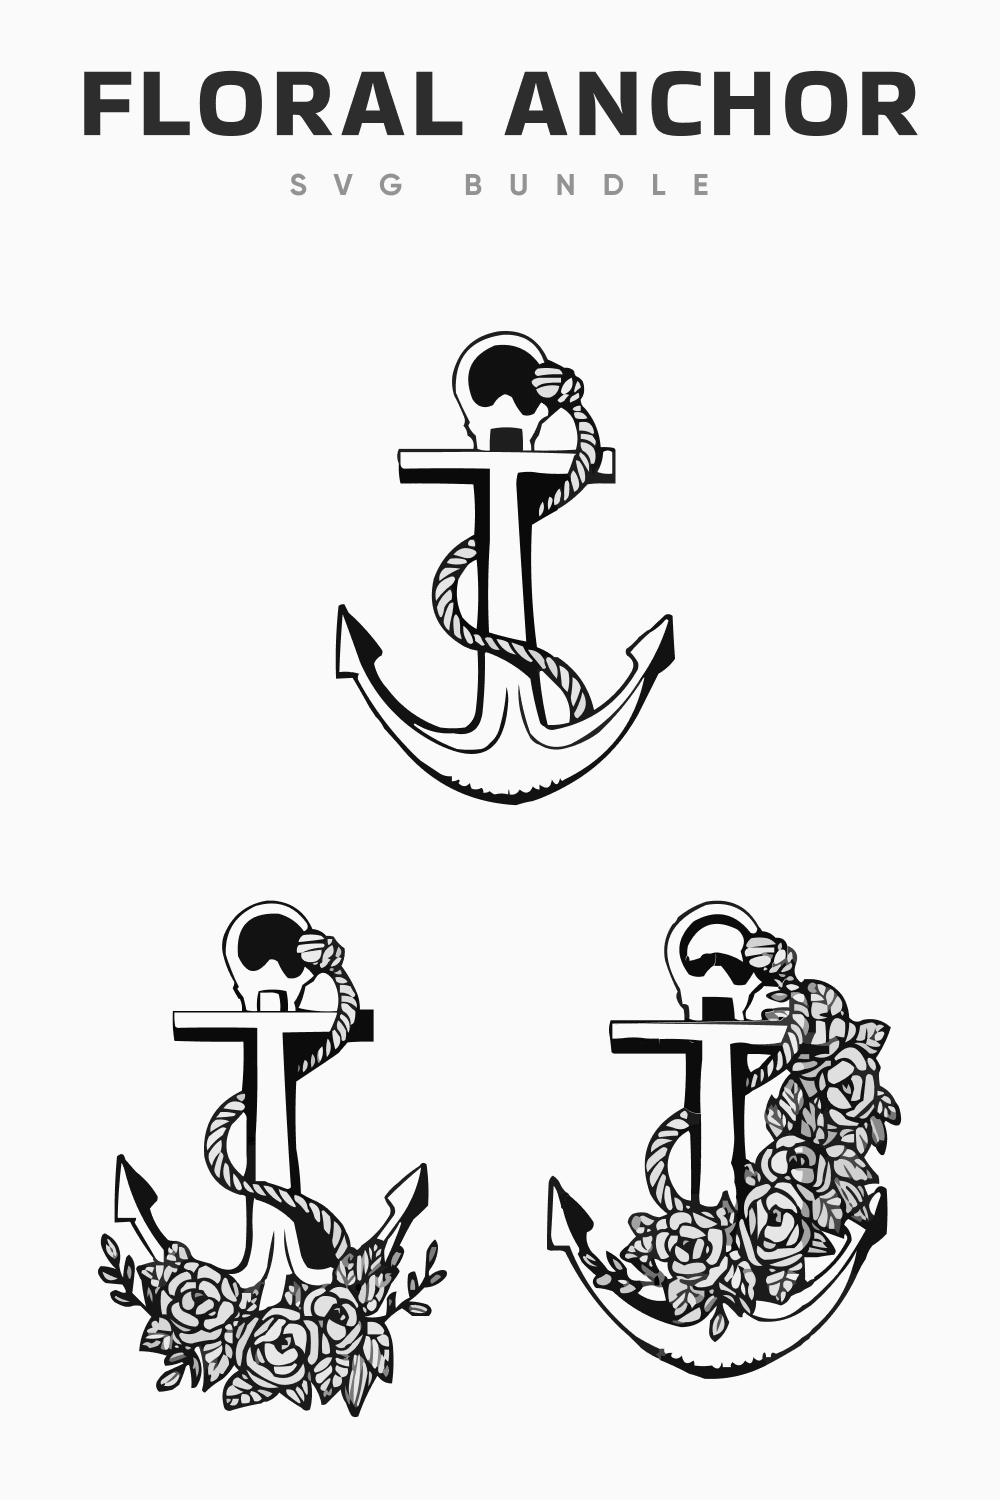 Three Large Anchors with Roses and Ropes.